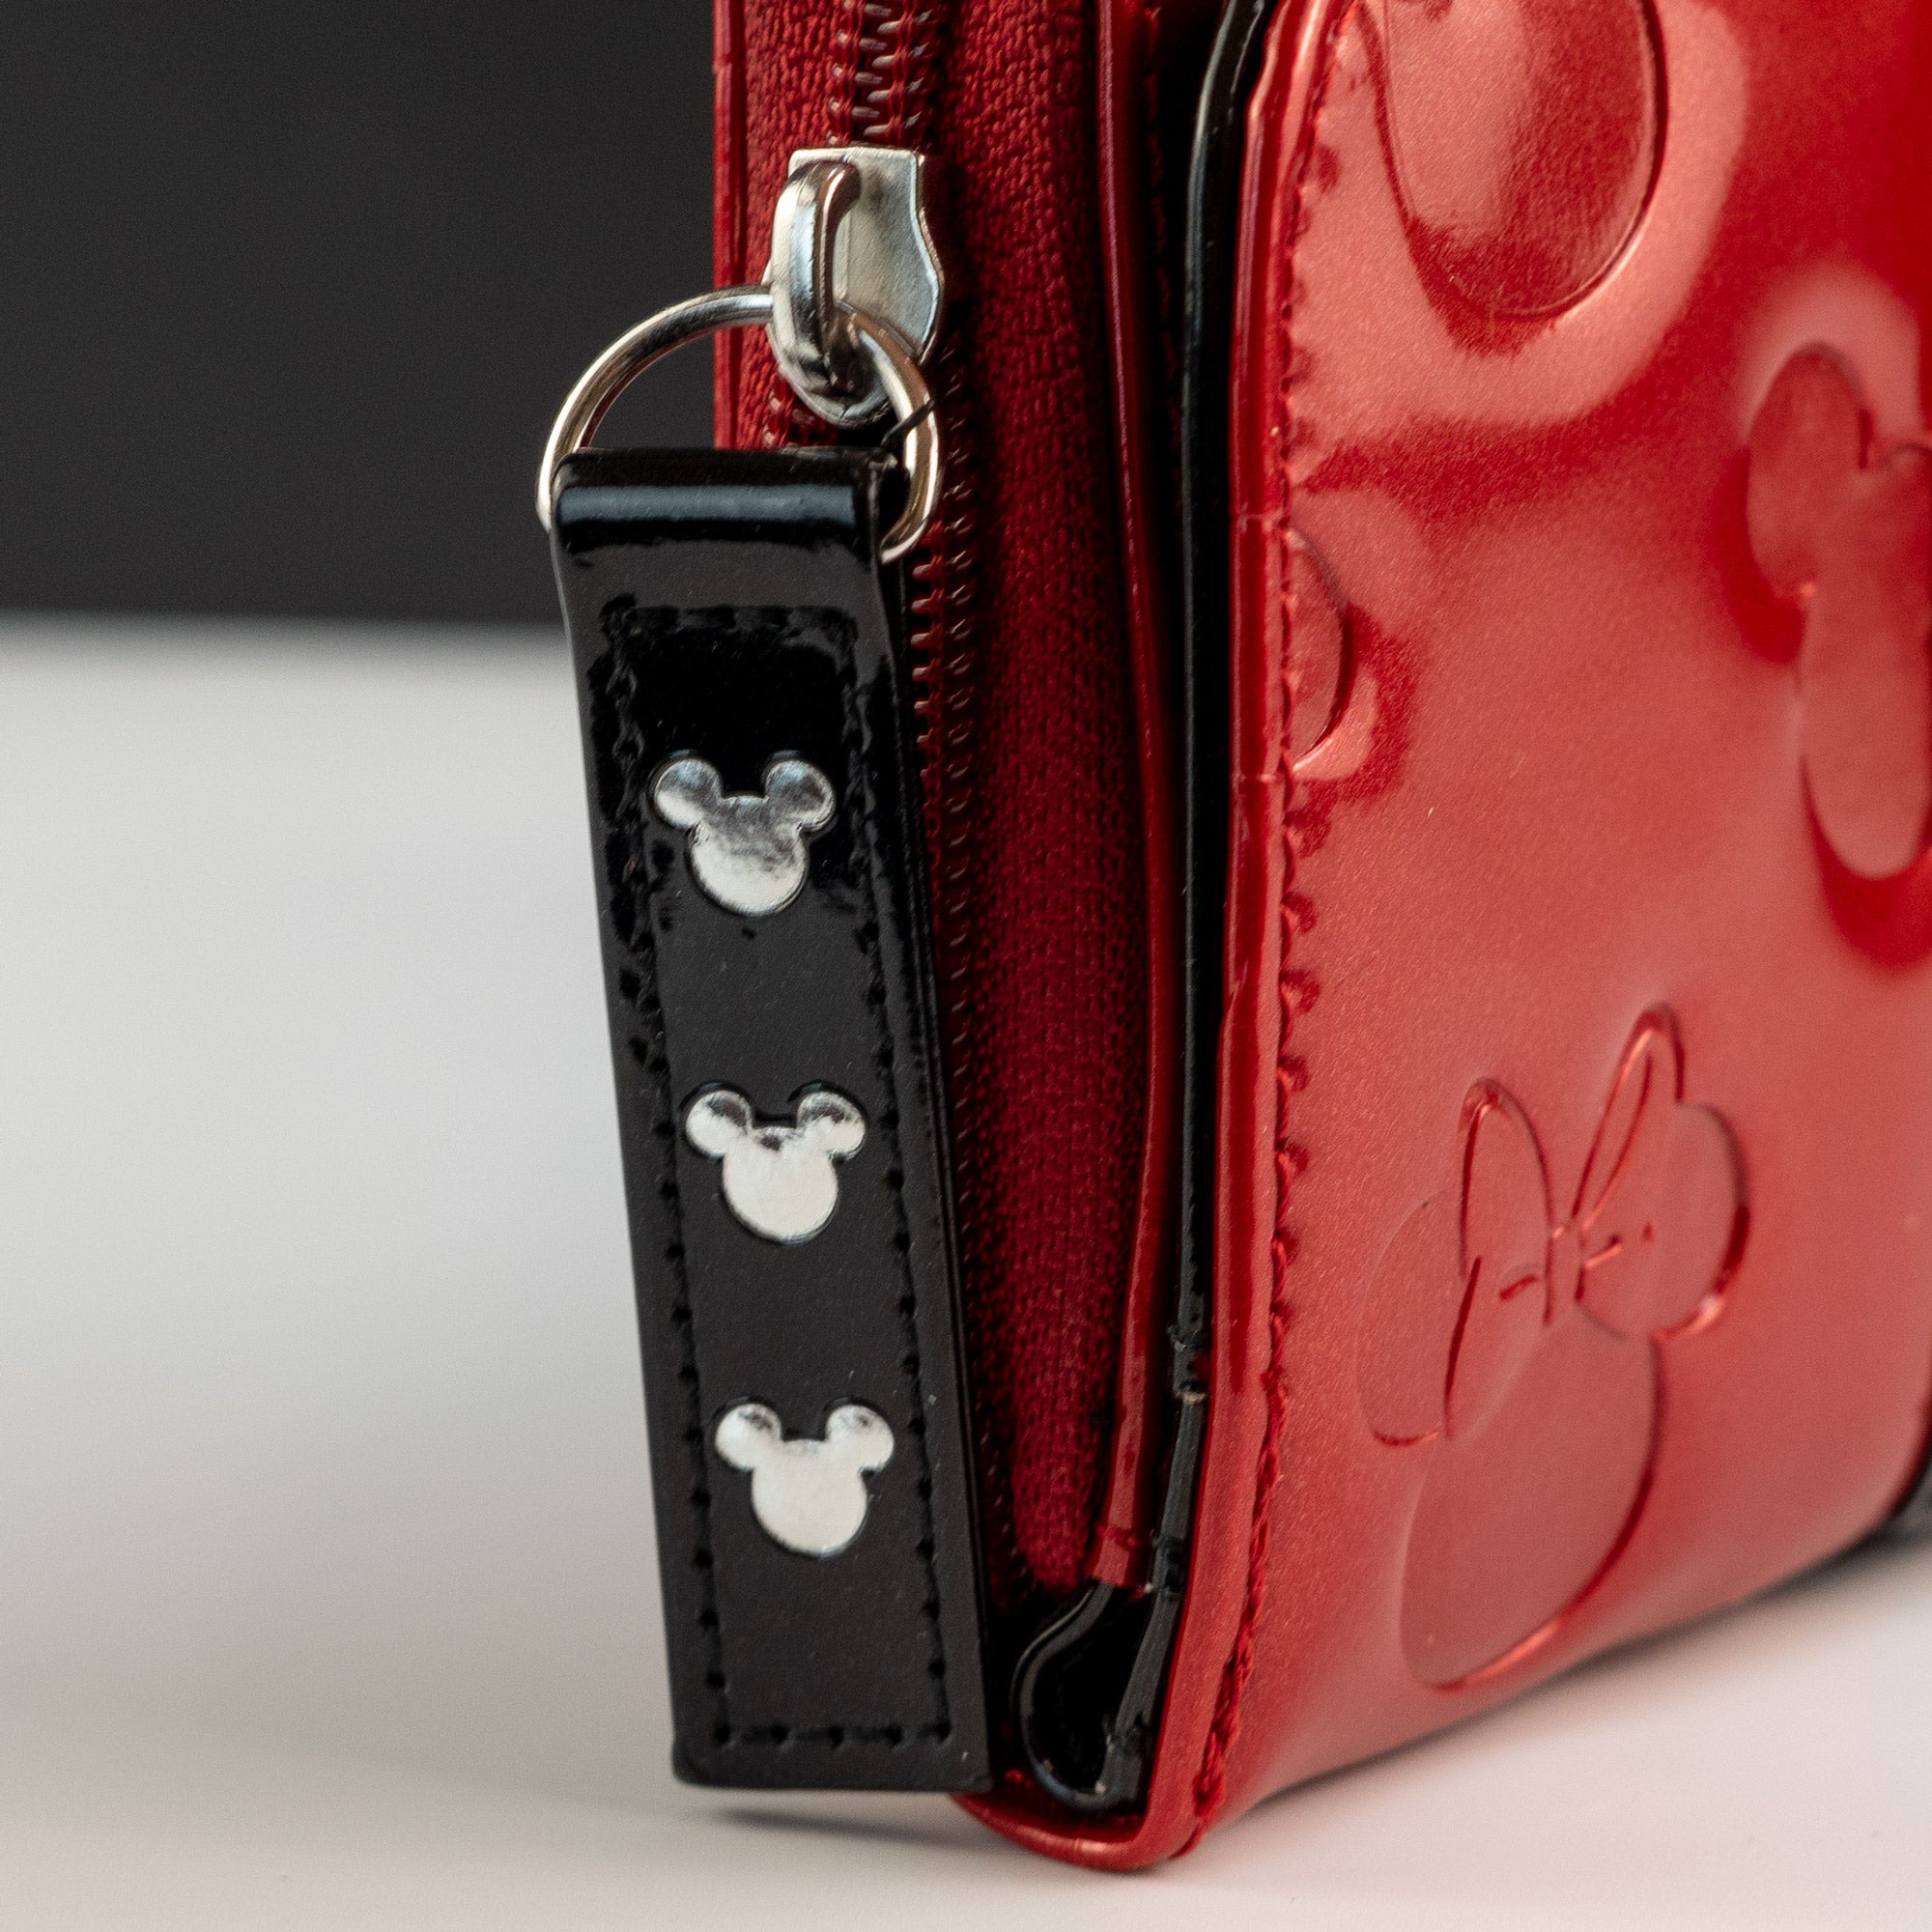 Loungefly x Disney Mickey and Minnie Mouse Red Silhouettes Wallet